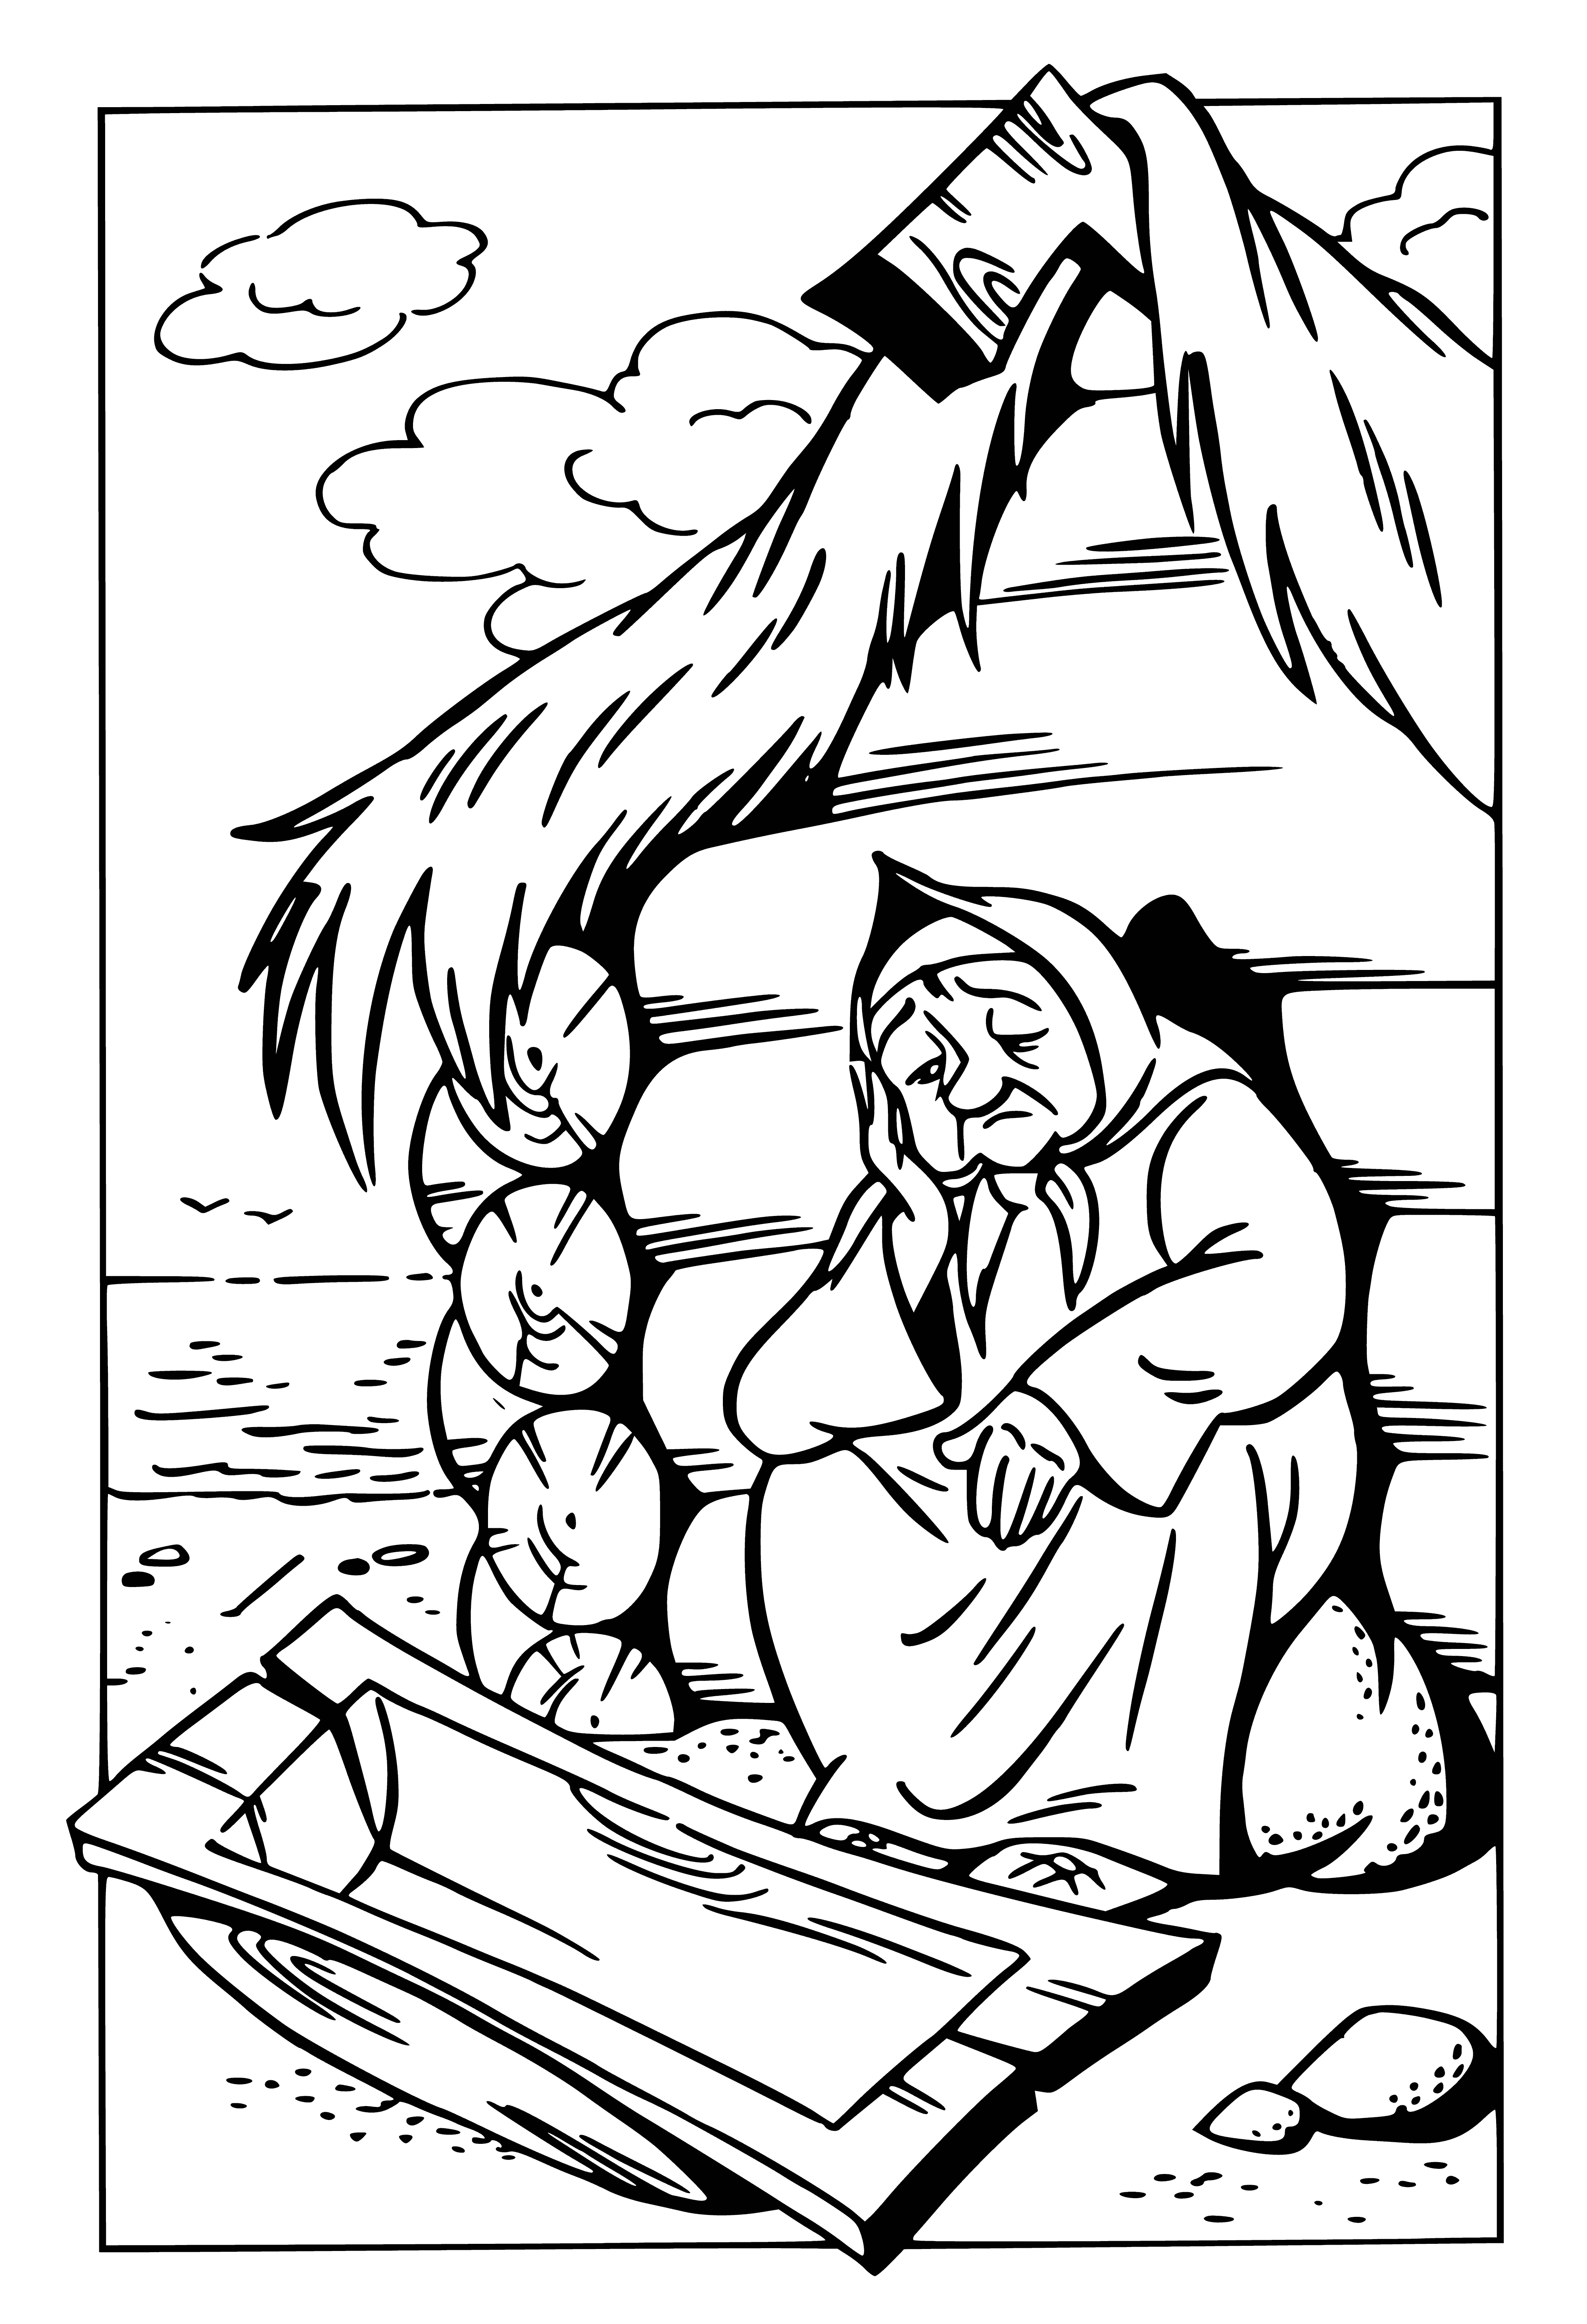 coloring page: An old woman leans on broken trough, wearing shawl & scarf. White hair, wrinkled face, looking at the ground.